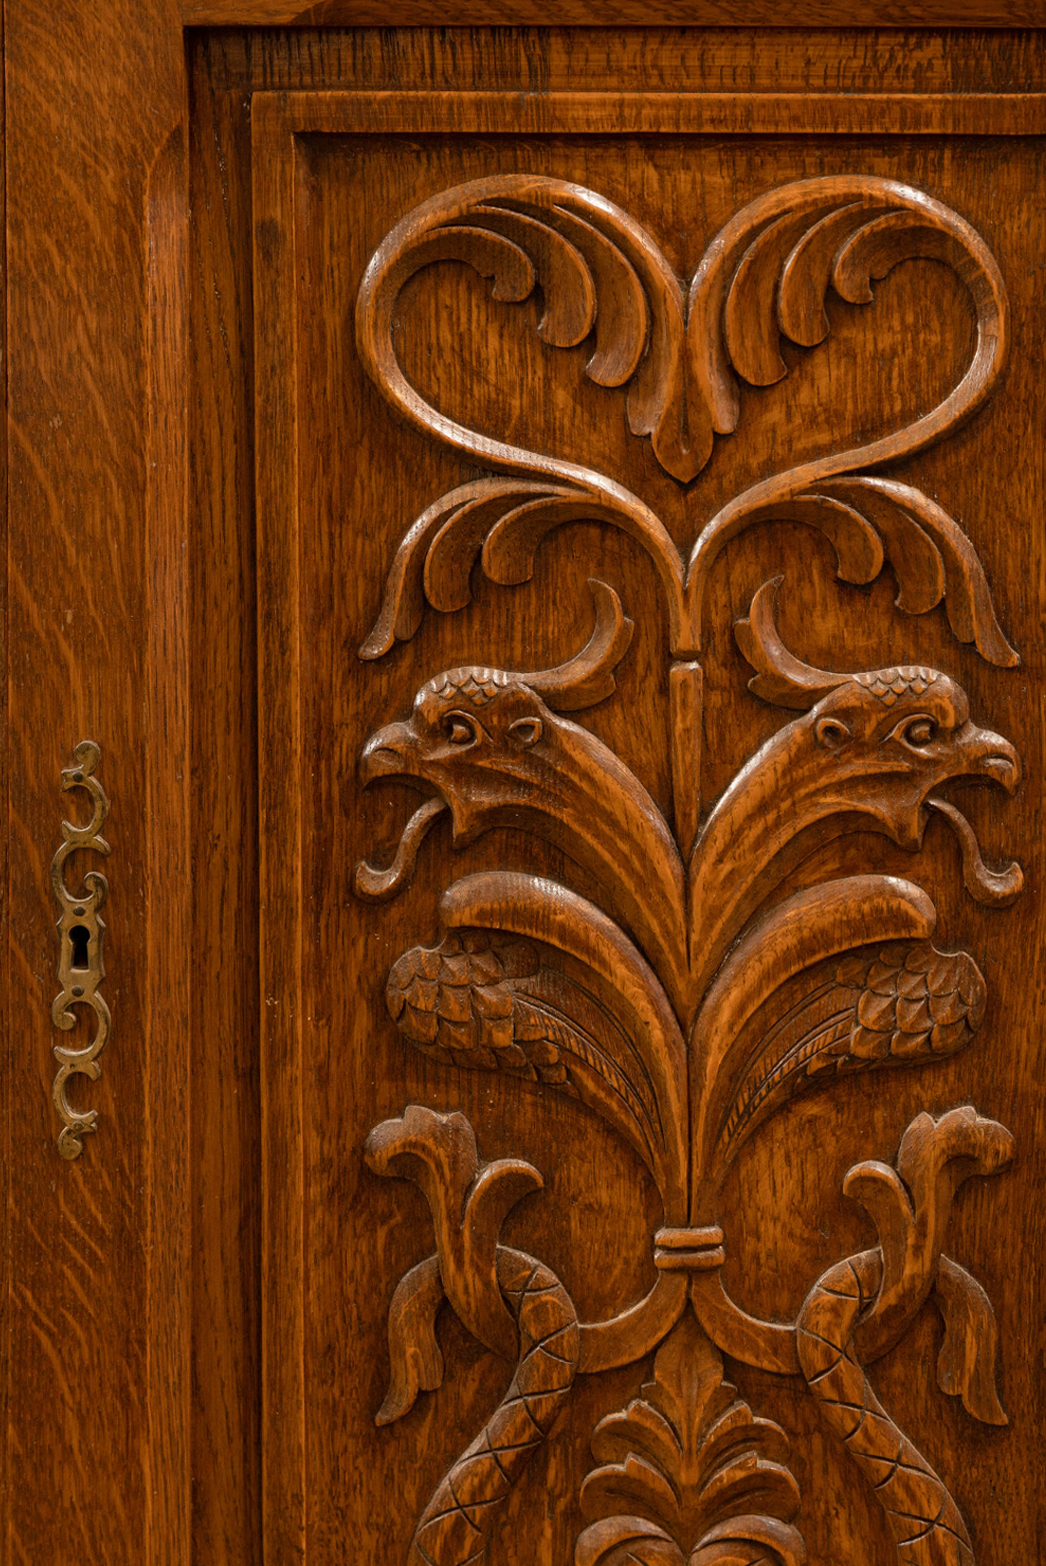 Limited edition sideboard with carvings on doors 